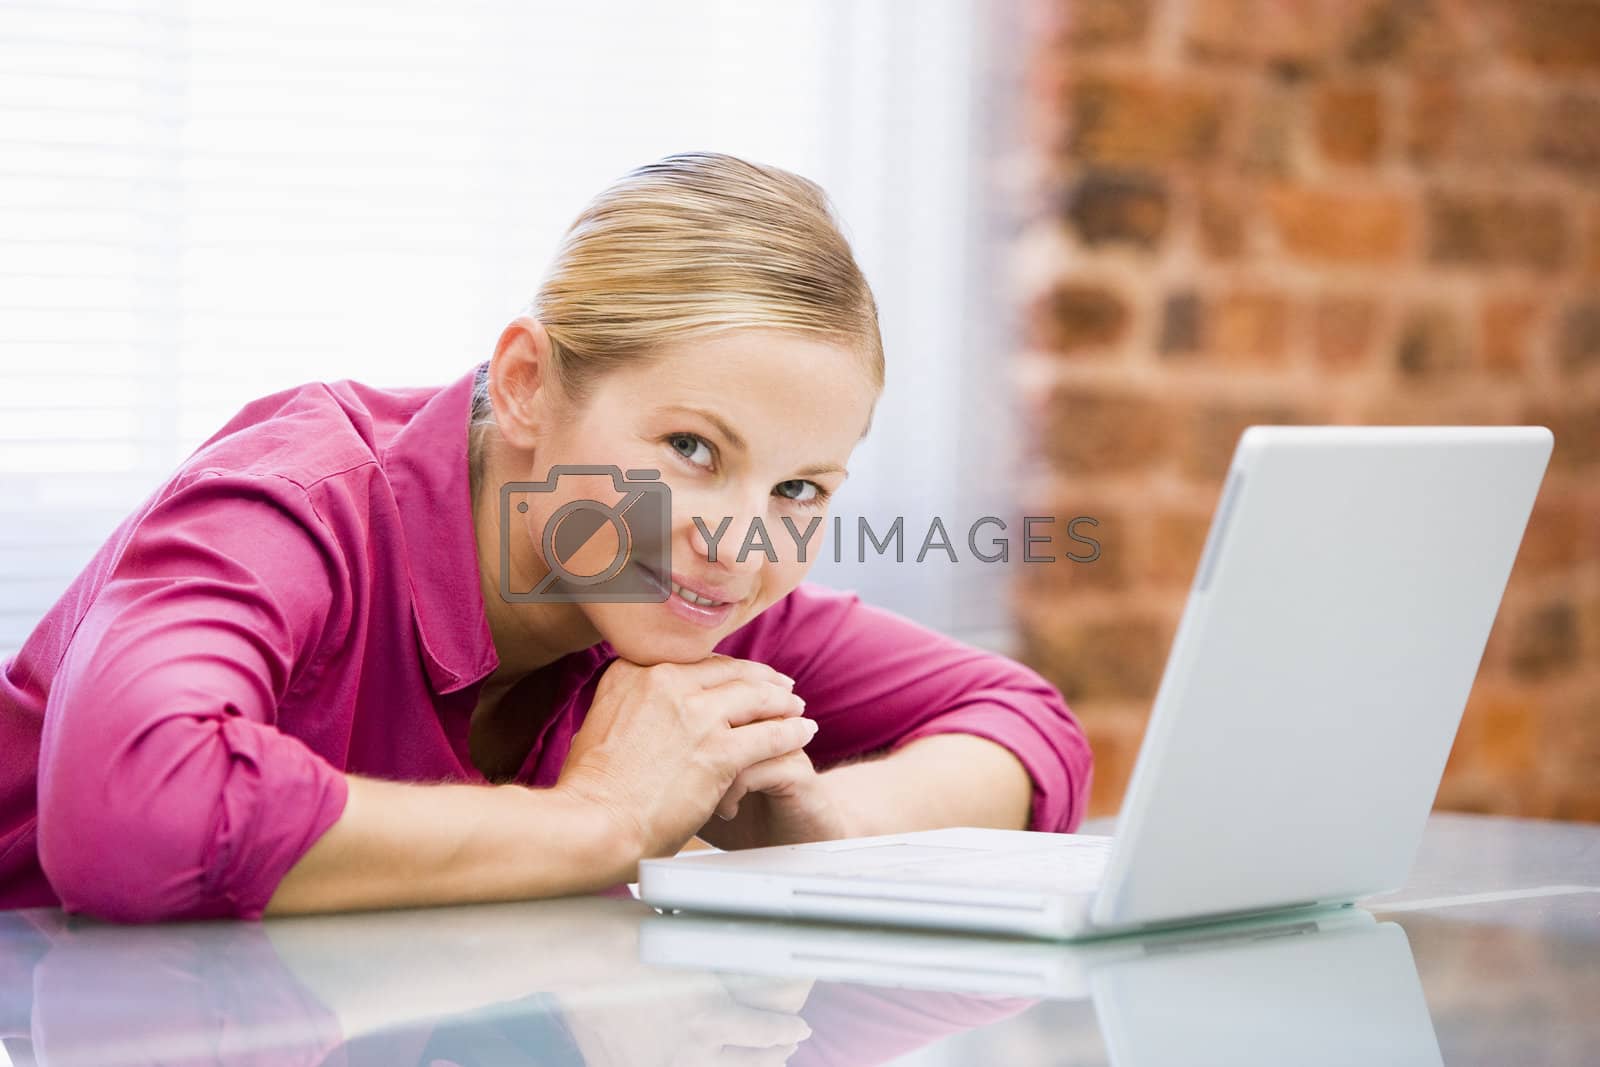 Royalty free image of Businesswoman sitting in office with laptop smiling by MonkeyBusiness